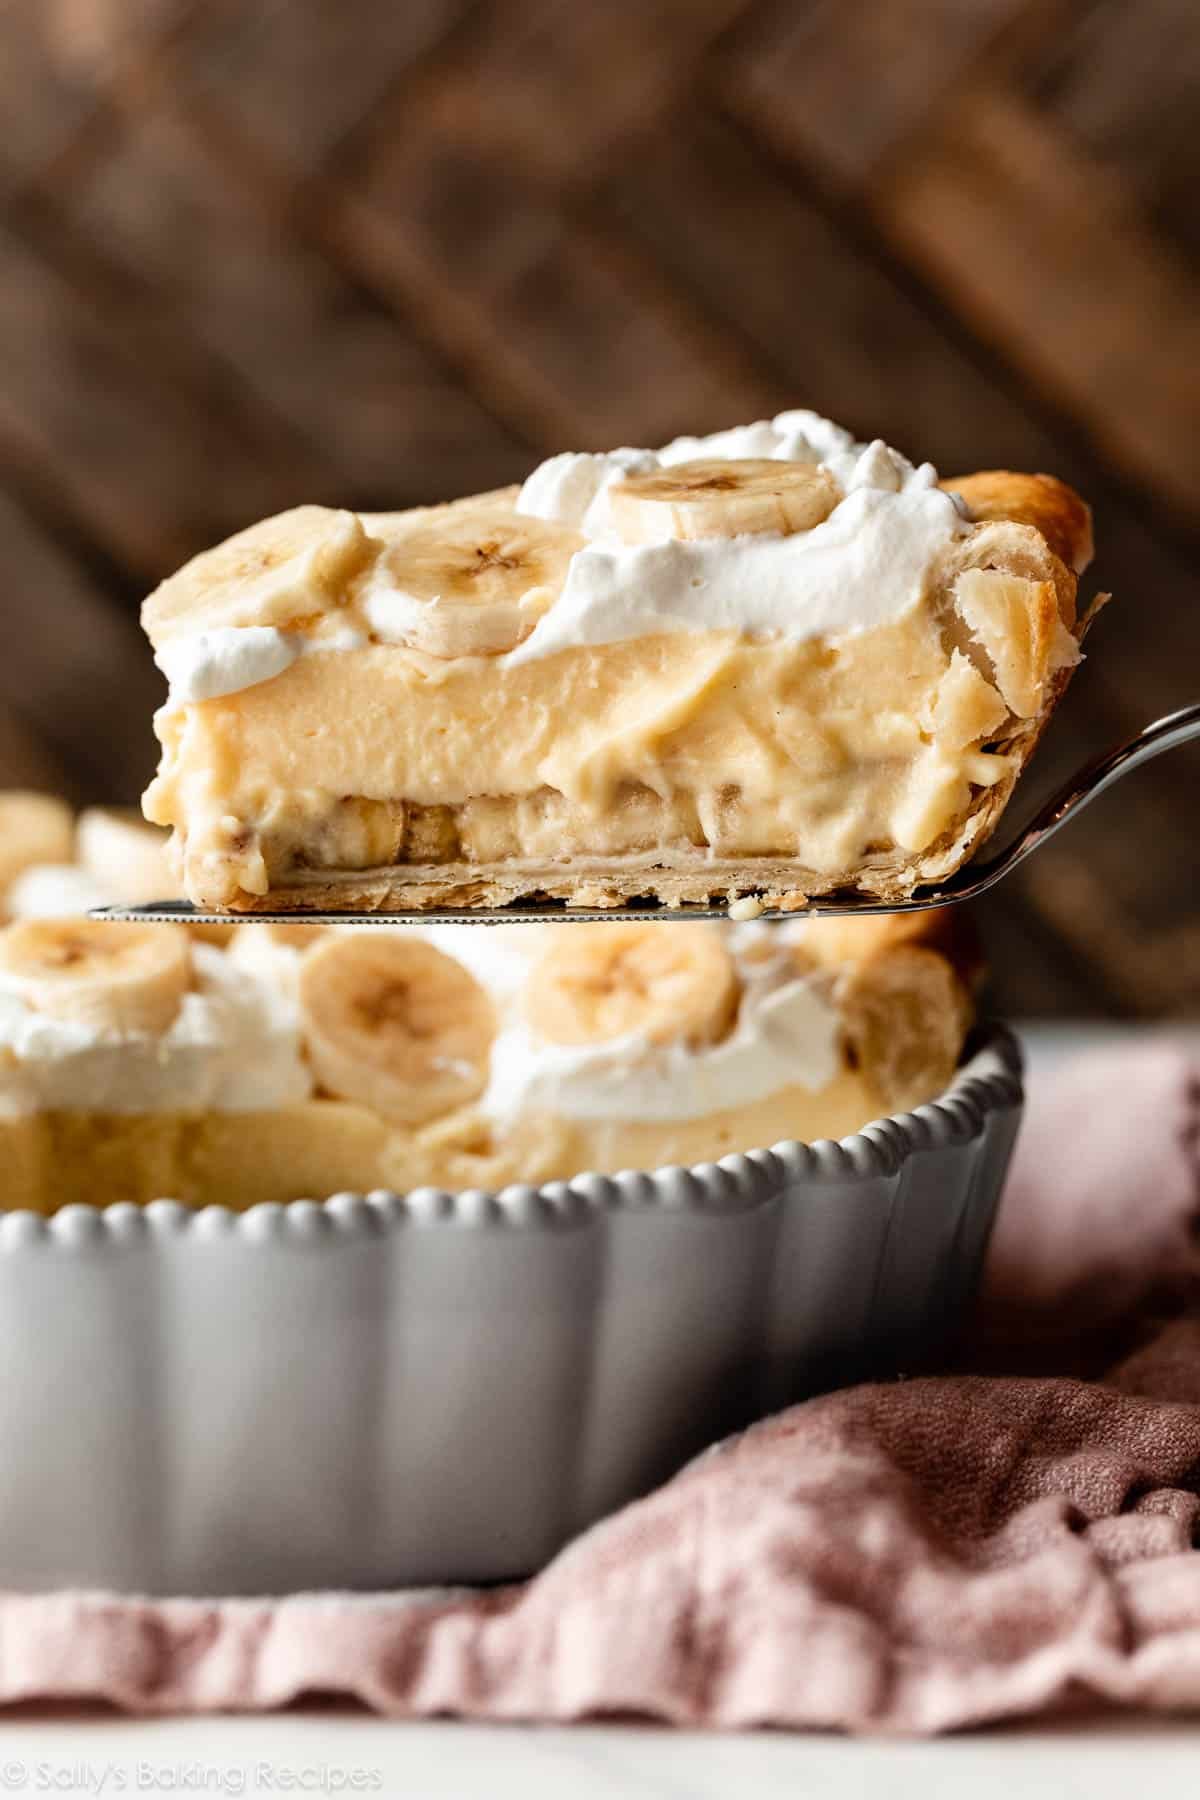 slice of banana cream pie being removed from pie dish.